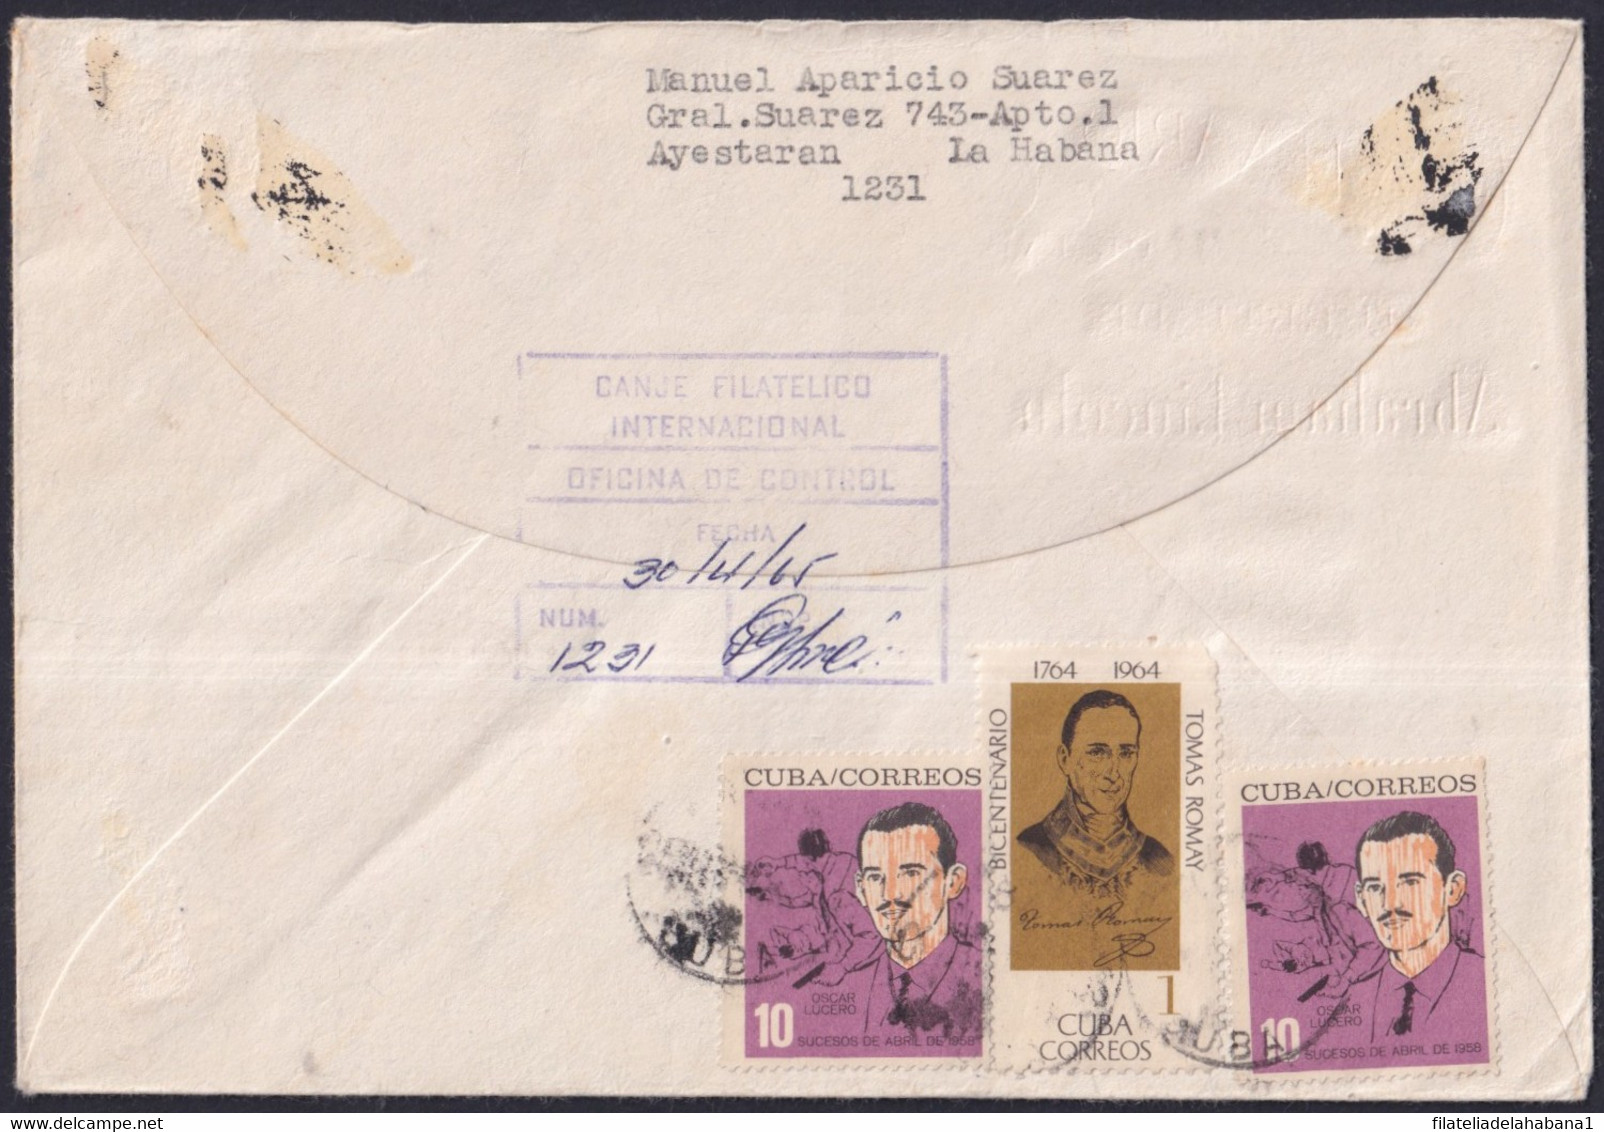 1965-FDC-96 CUBA 1965 FDC ABRAHAM LINCOLN REGISTERED COVER TO ESPAÑA SPAIN. - Covers & Documents